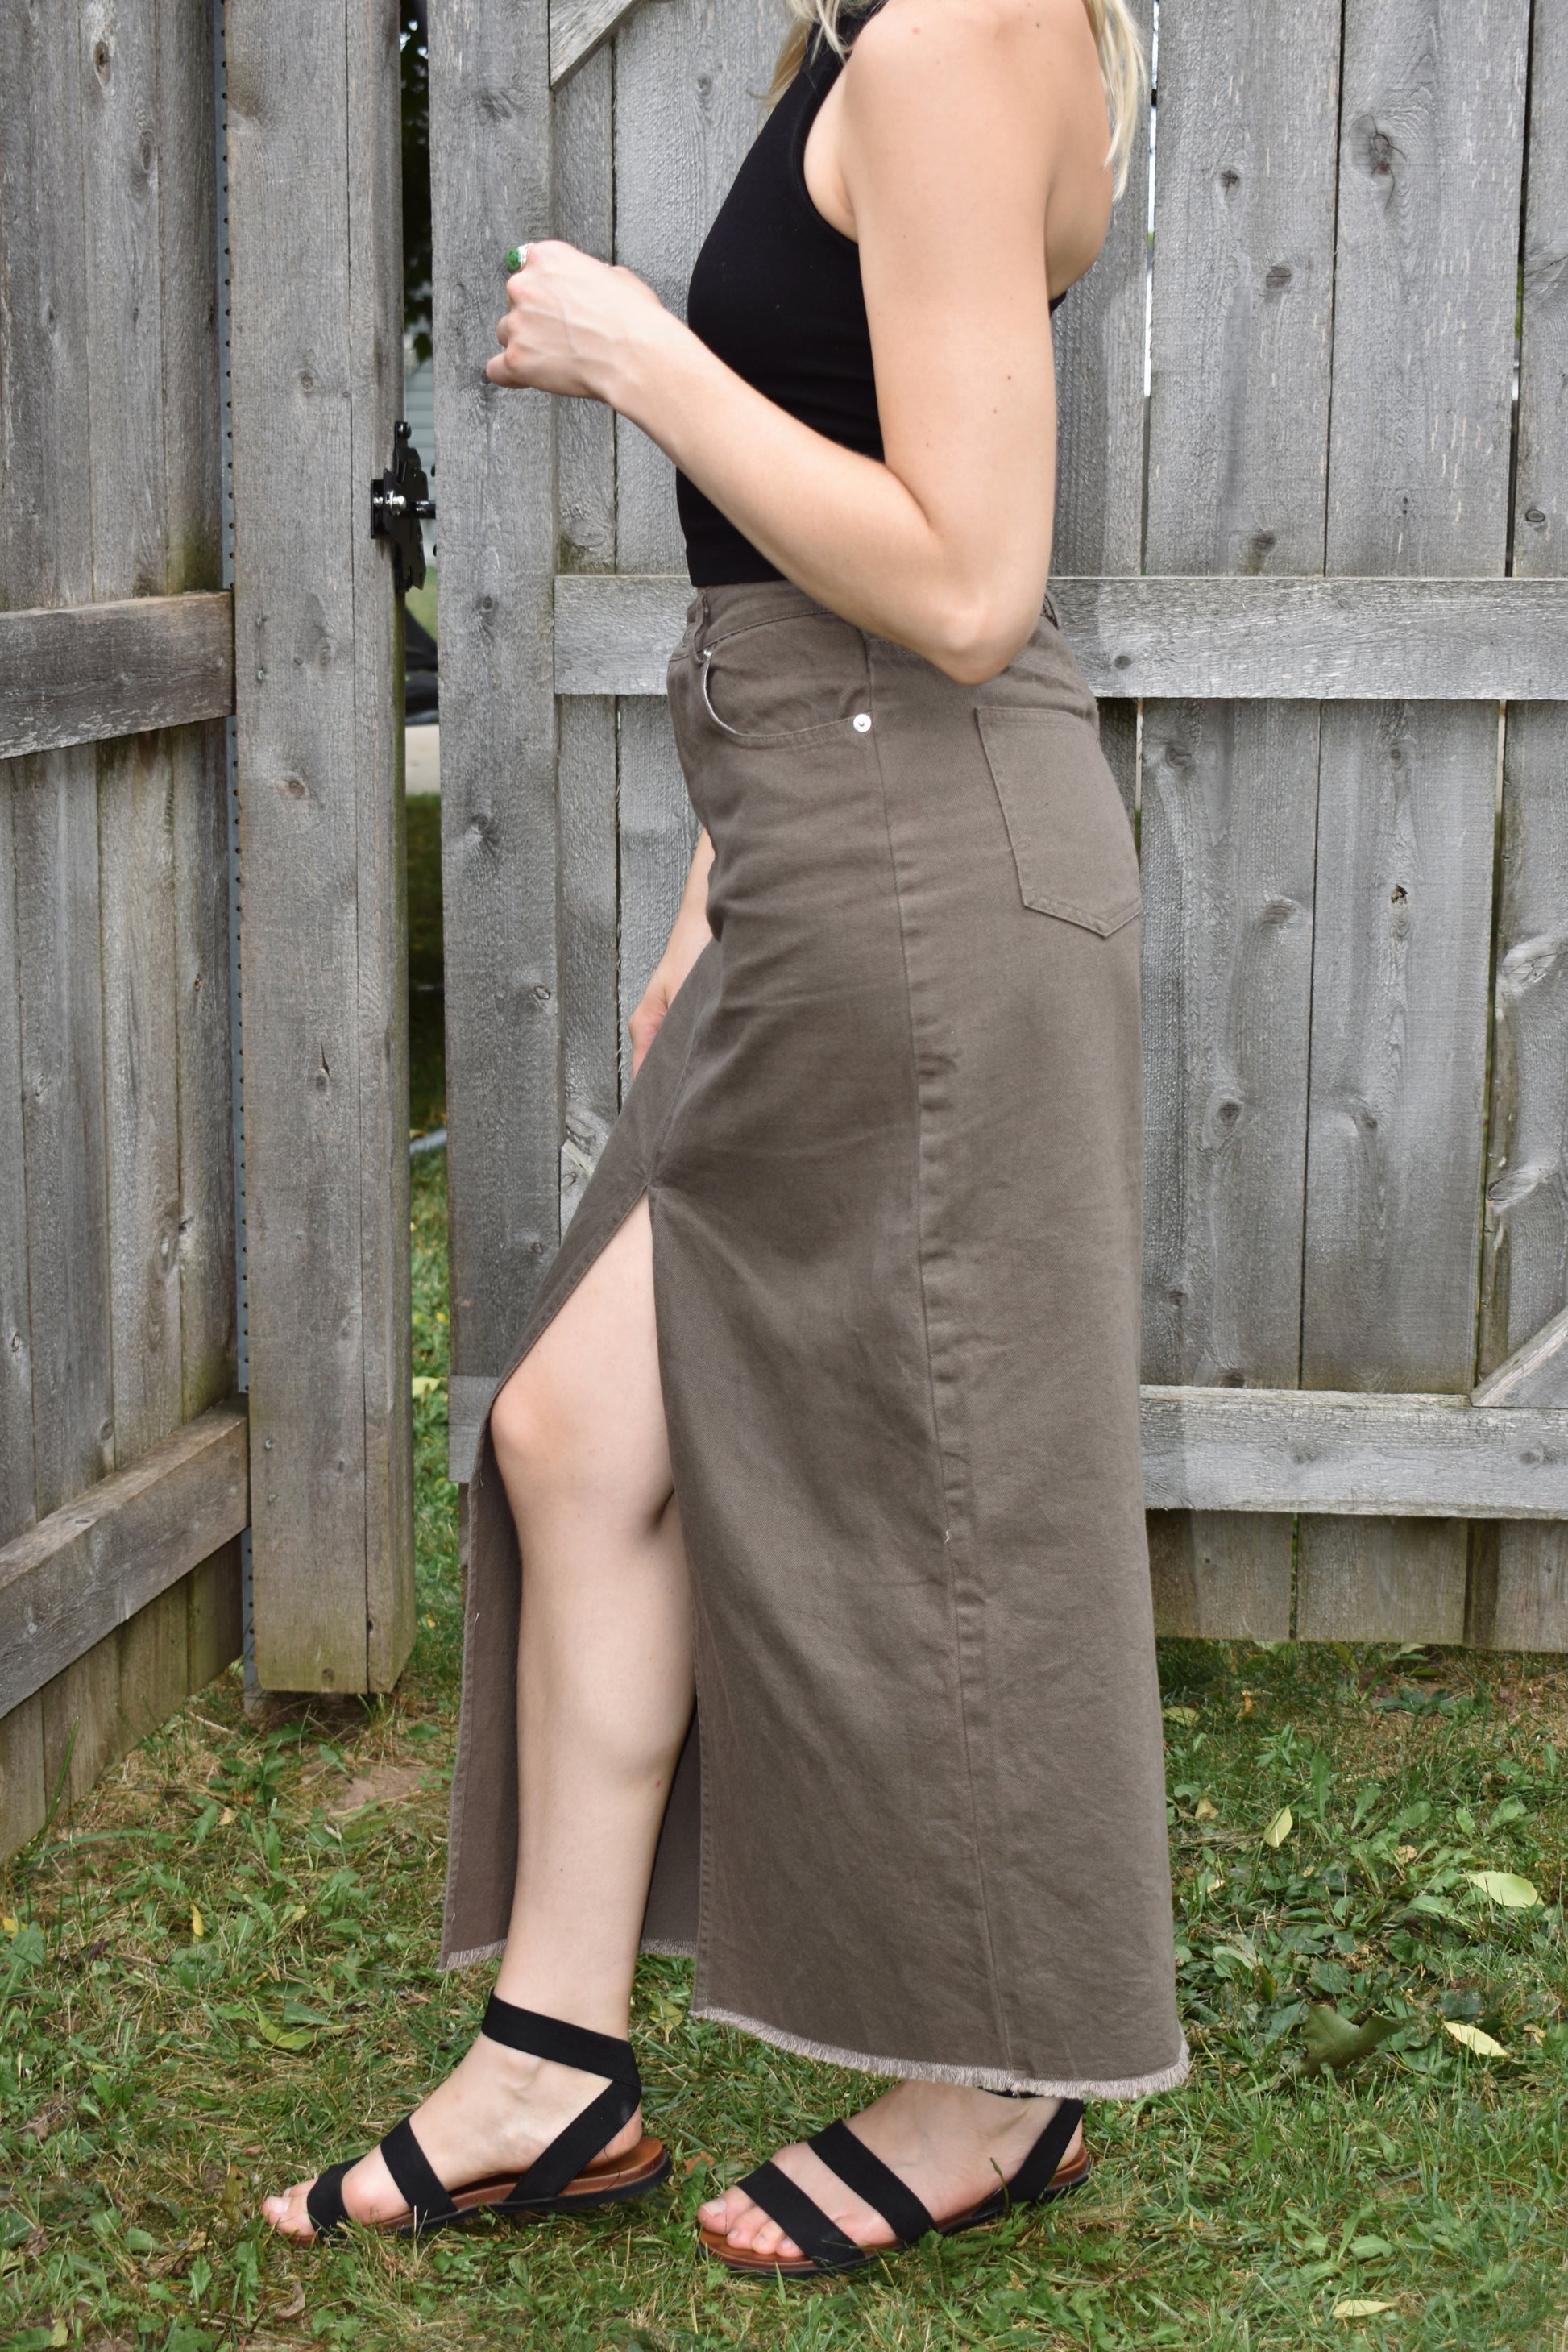 chesnut denim midi skirt with slit up the front in the center, raw hem, front and back pockets, zip and button enclosure